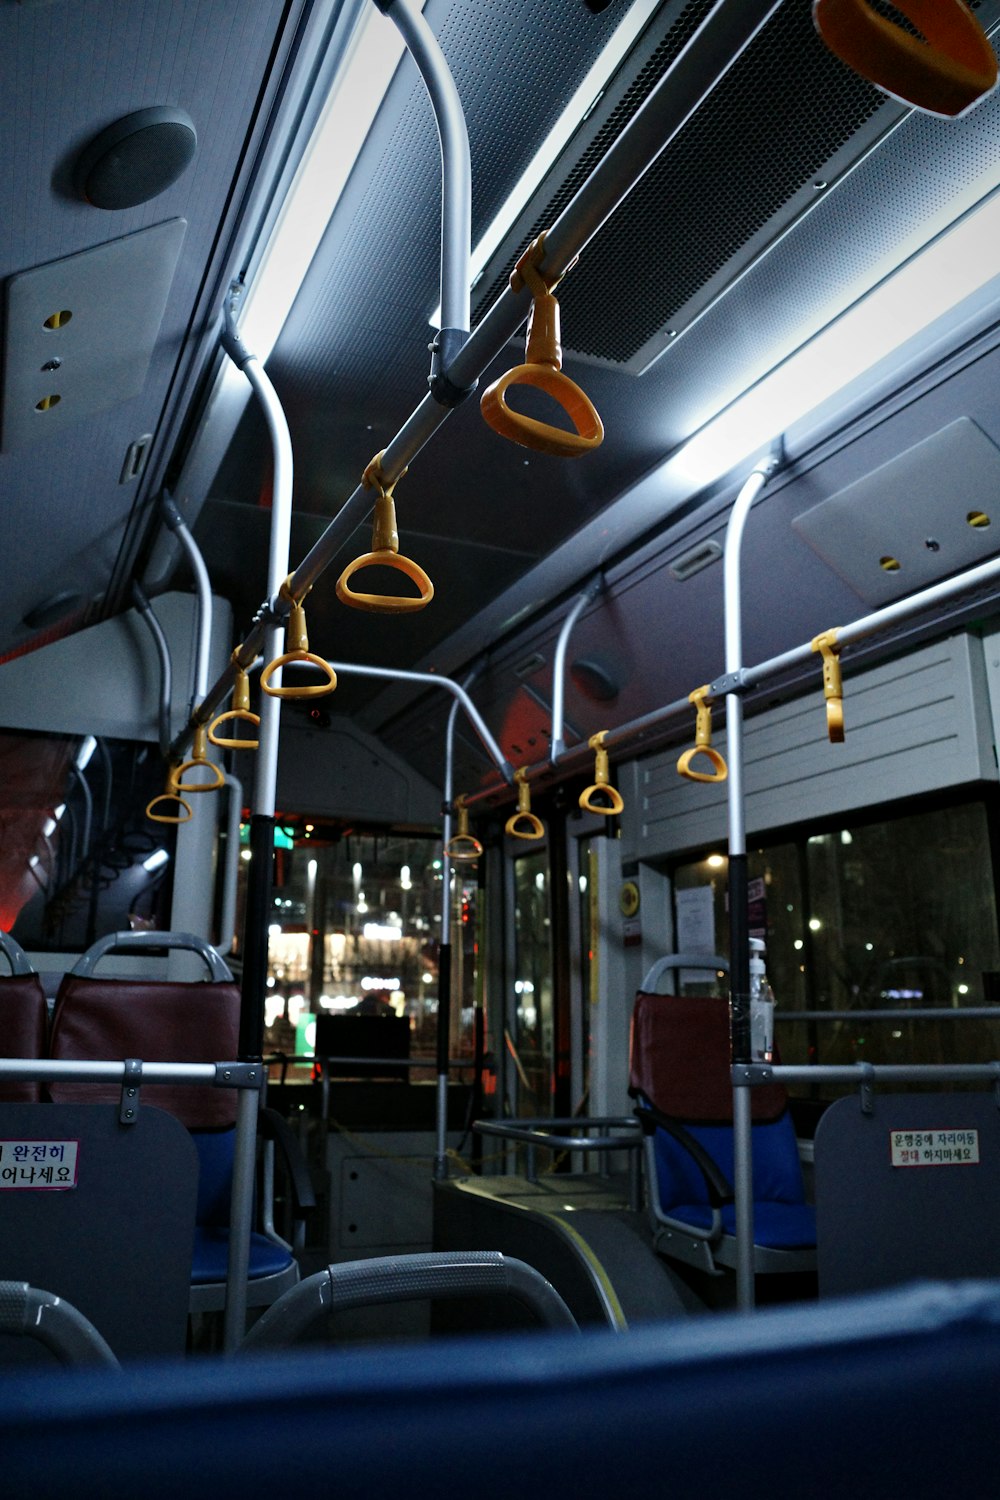 a view of the inside of a public transit bus